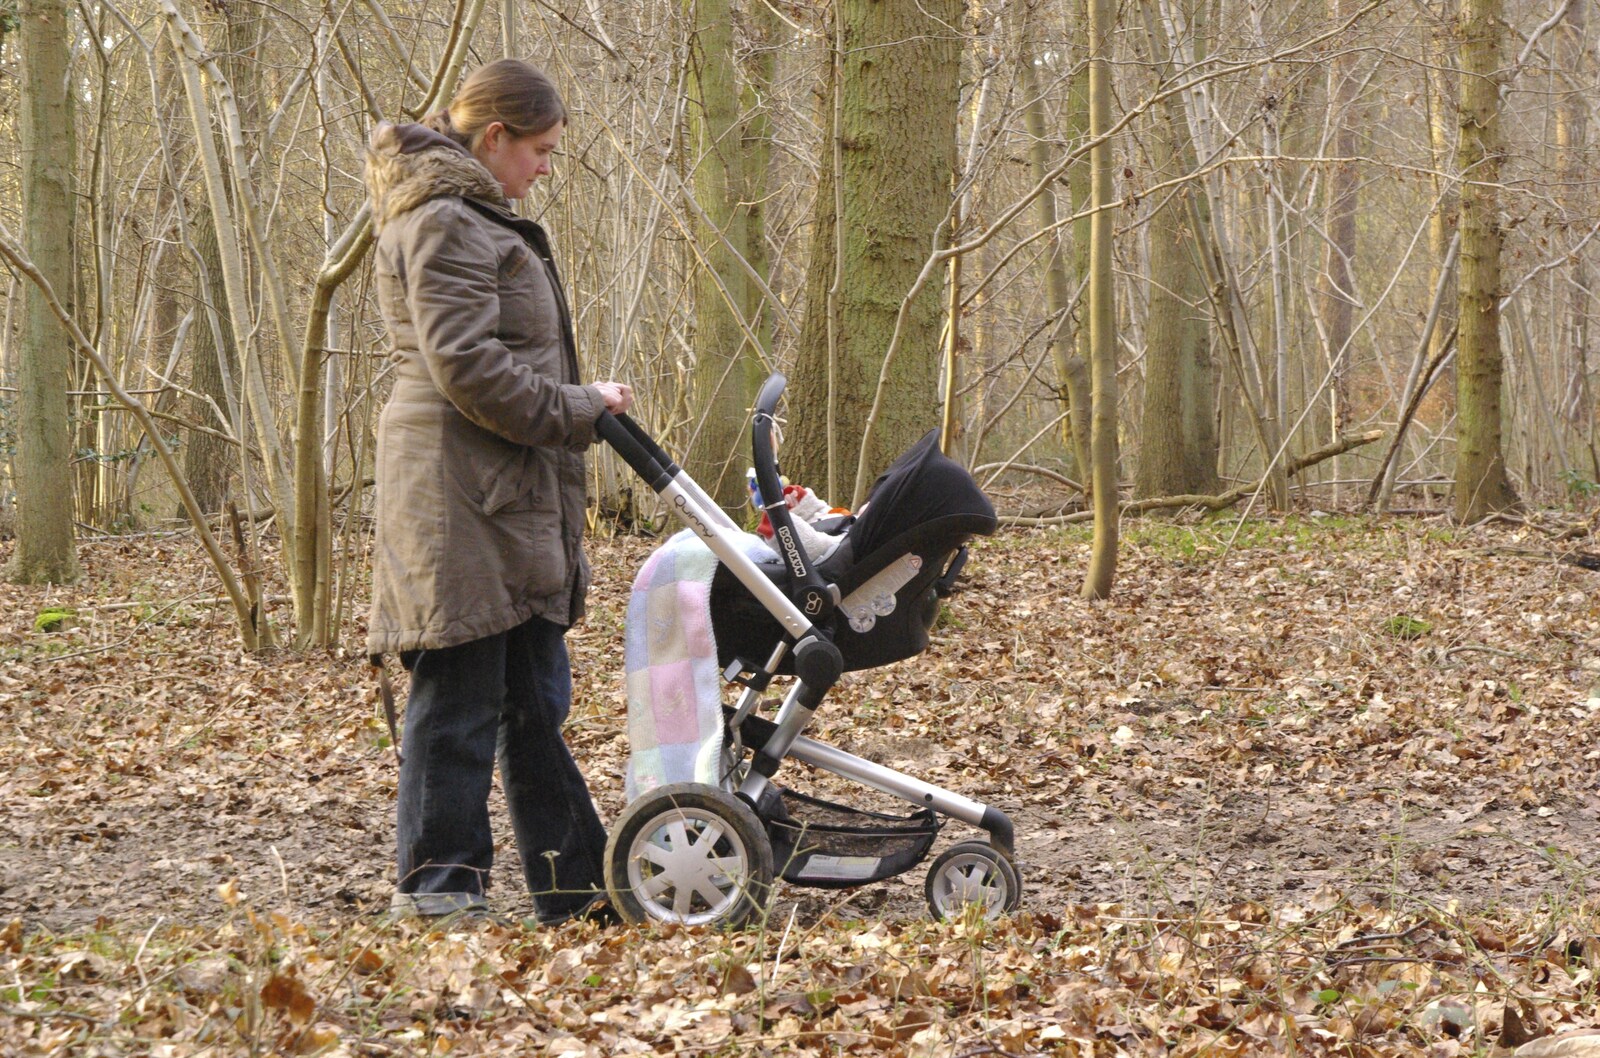 Isobel and pram from Zack's Birthday, and a Walk in the Forest, Cambridge and East Harling, Norfolk - 21st February 2009